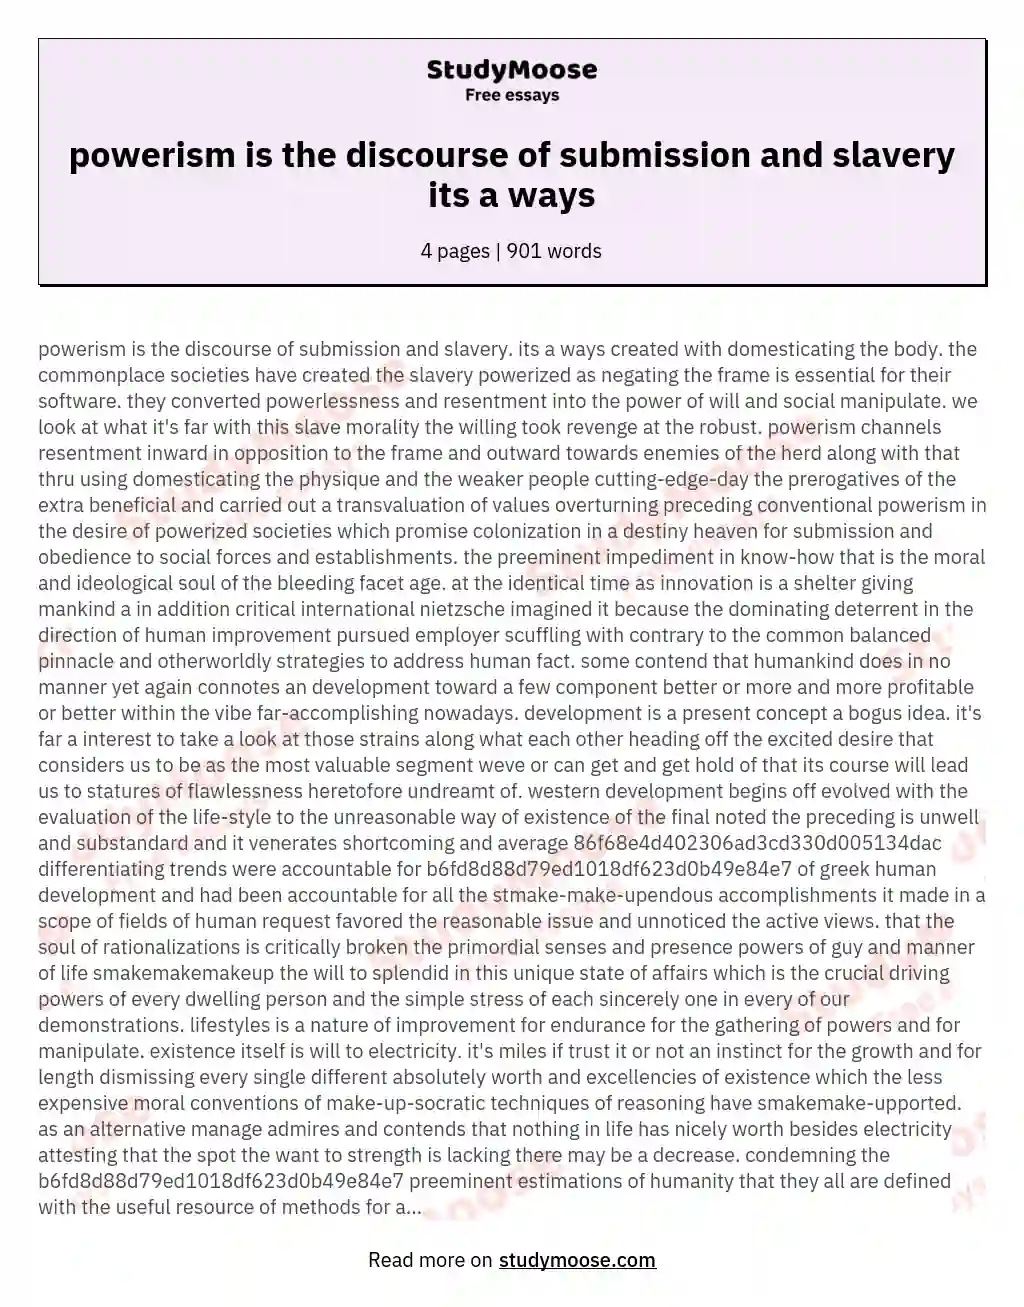 powerism is the discourse of submission and slavery its a ways